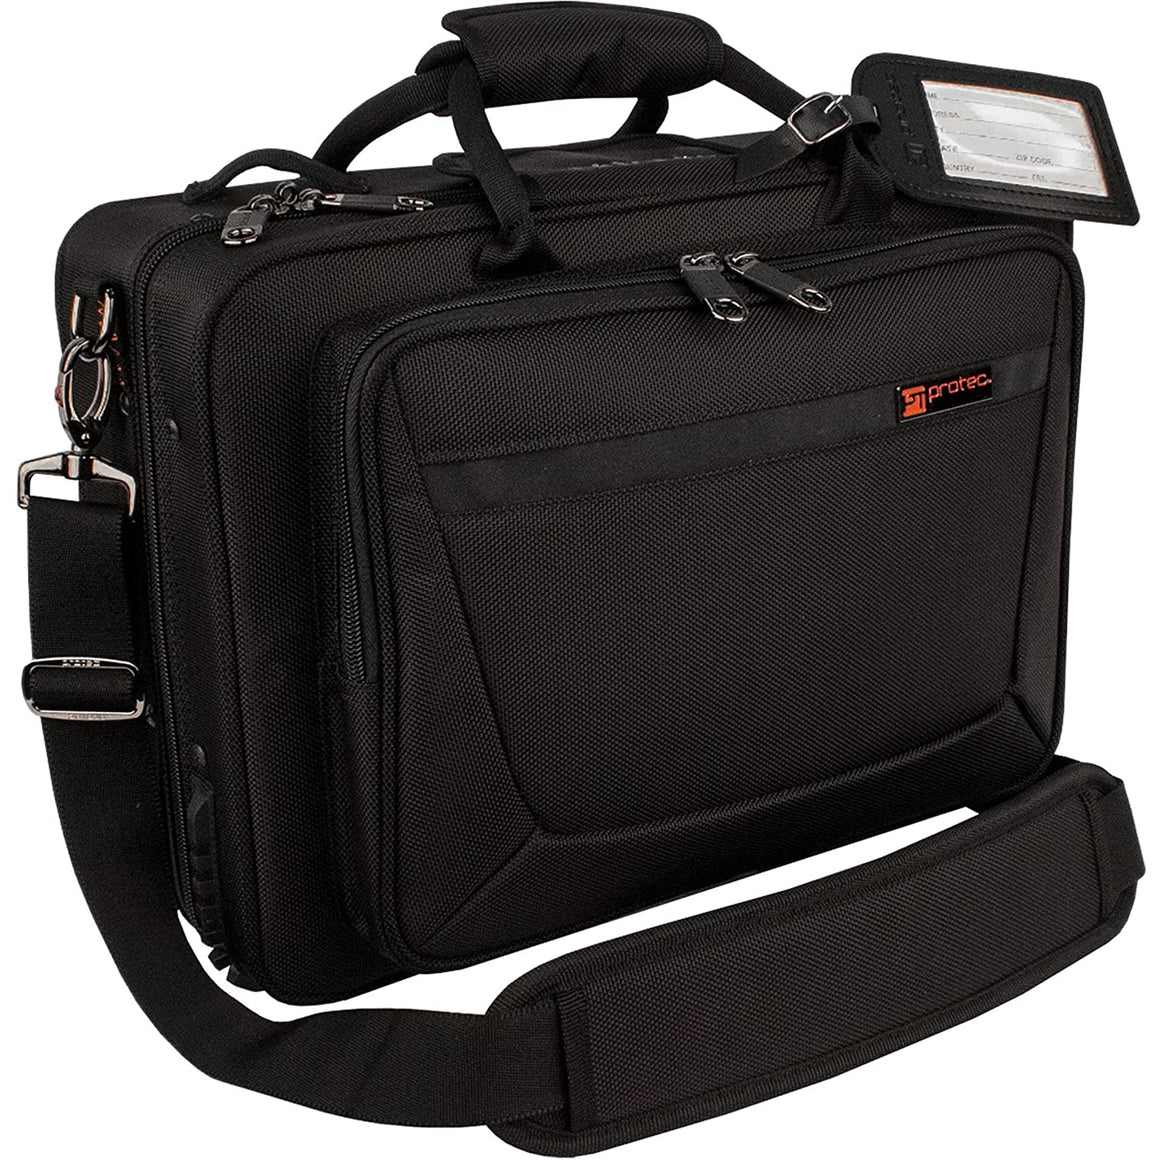 Protec PB307CA Carry All Pro Pac Clarinet Case